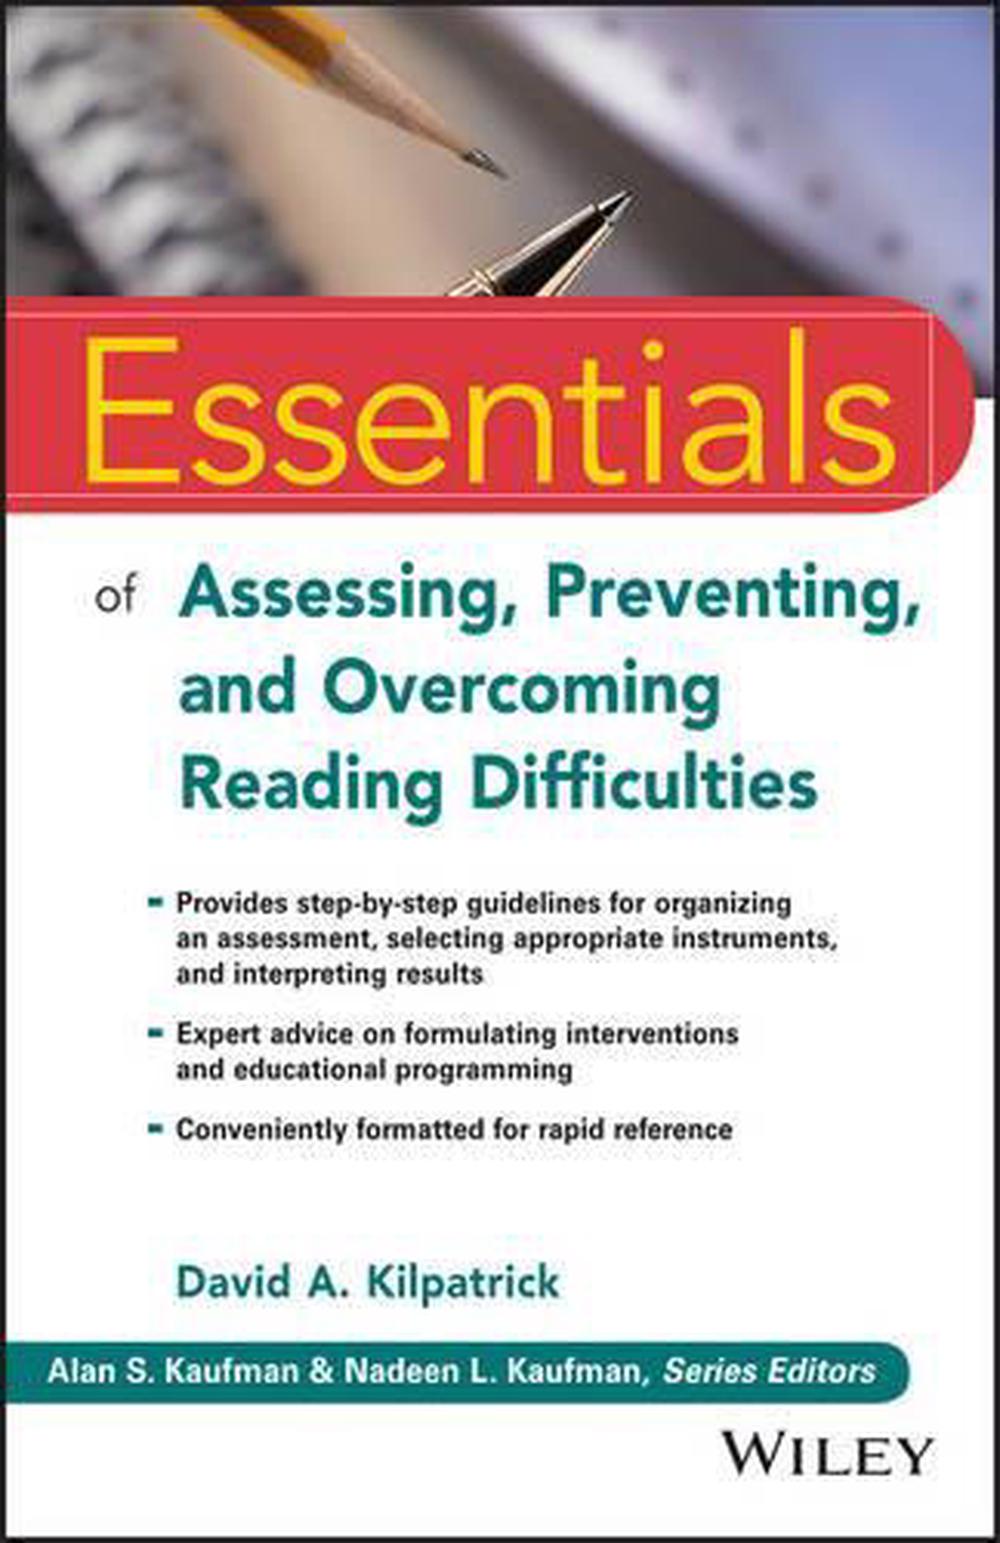 Essentials of Assessing, Preventing, and Overcoming Reading Difficulties by David A. Kilpatrick, Paperback, 9781118845240 | Buy online at The Nile